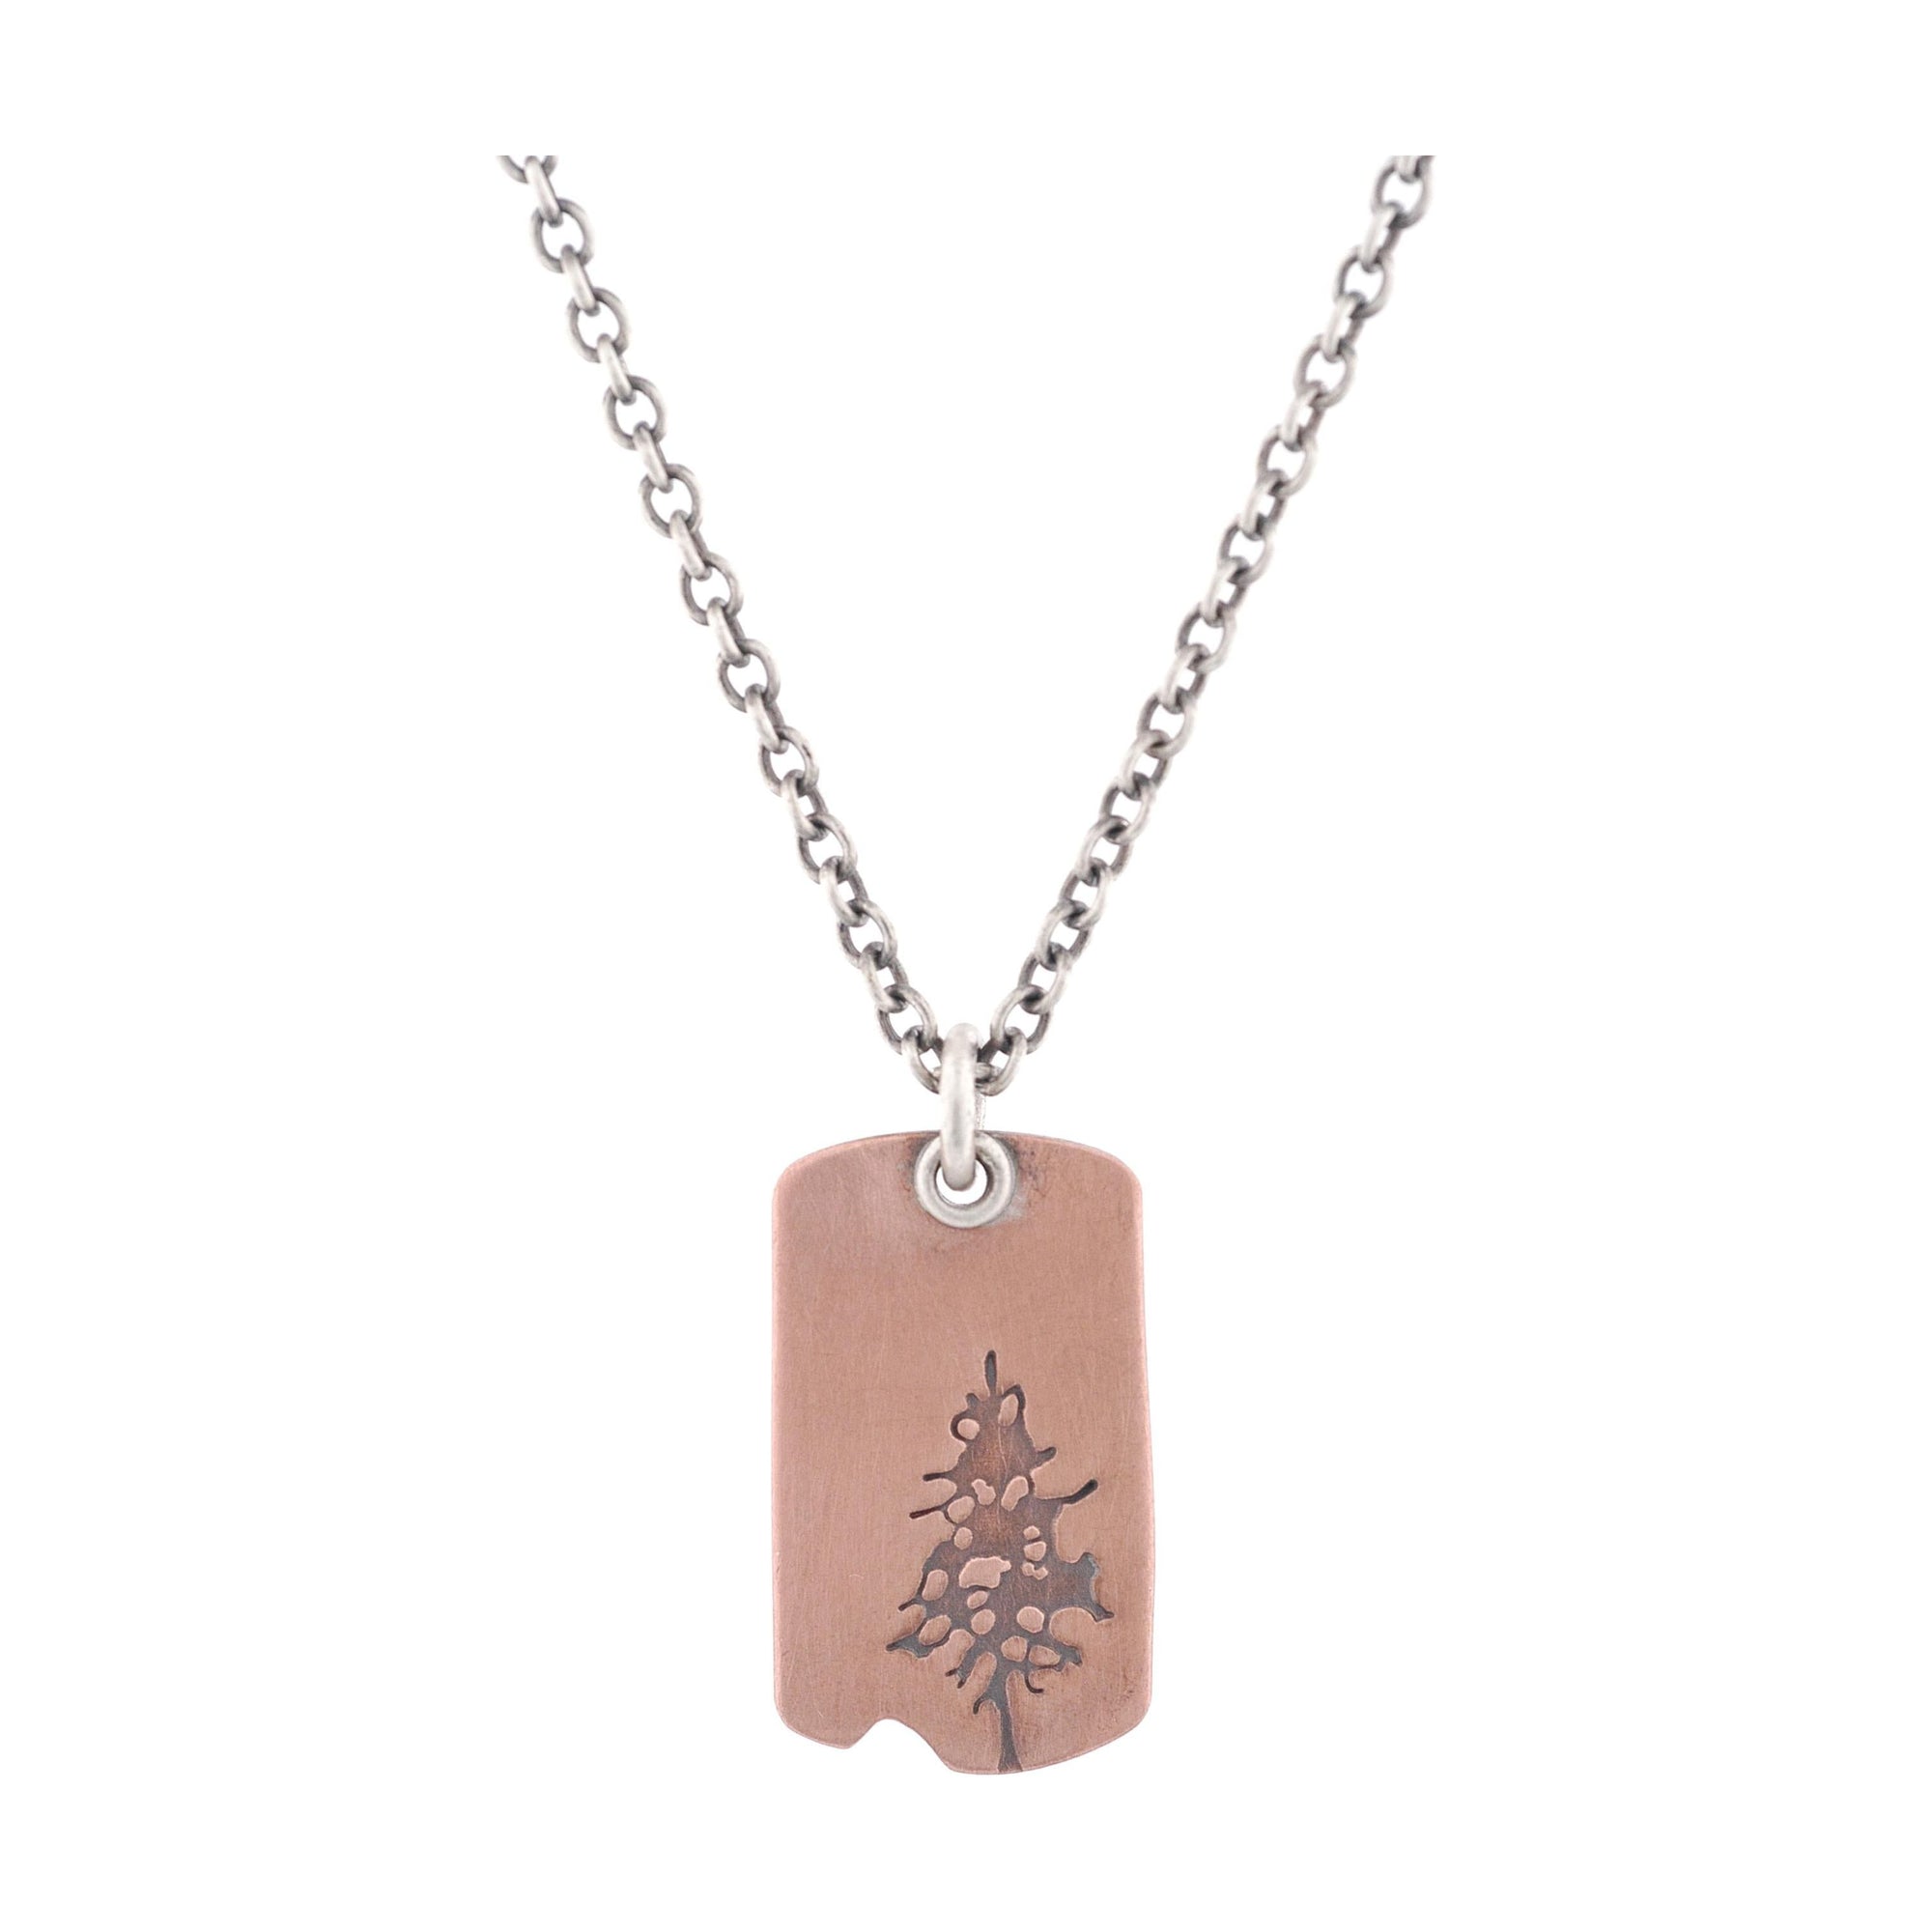 Tall Pines Copper Dog Tag